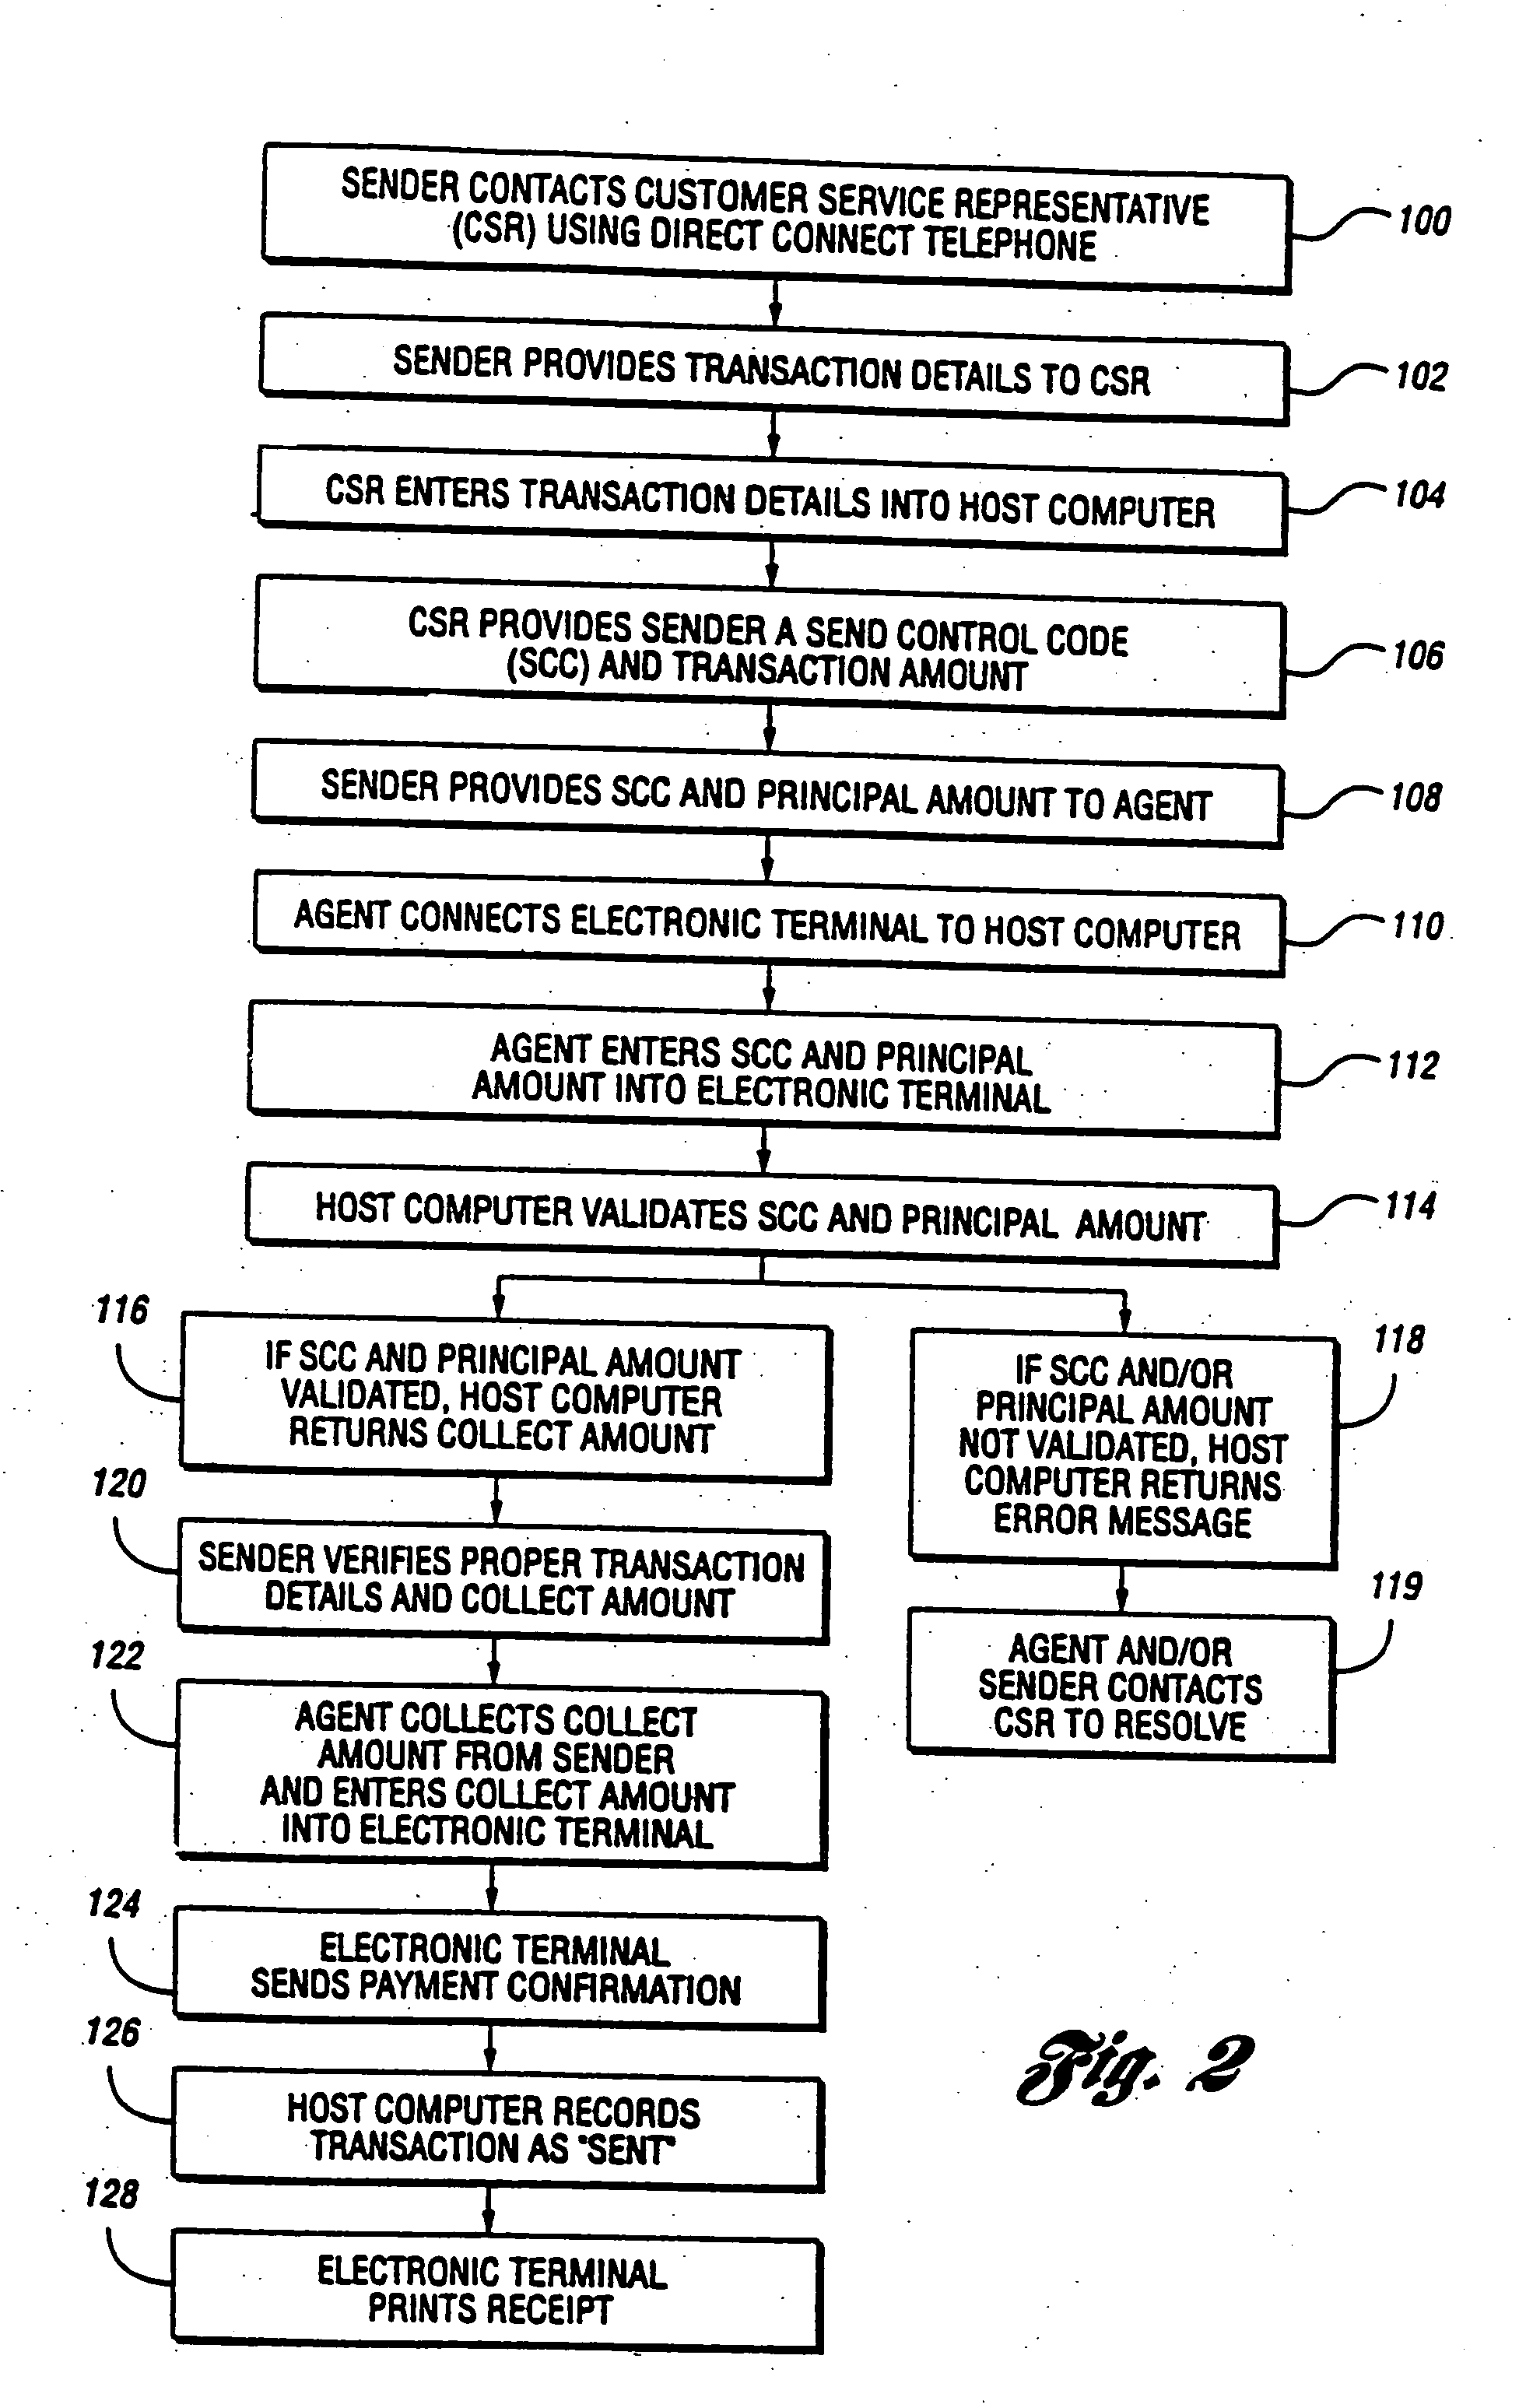 Systems and methods for price matching on funds transfers